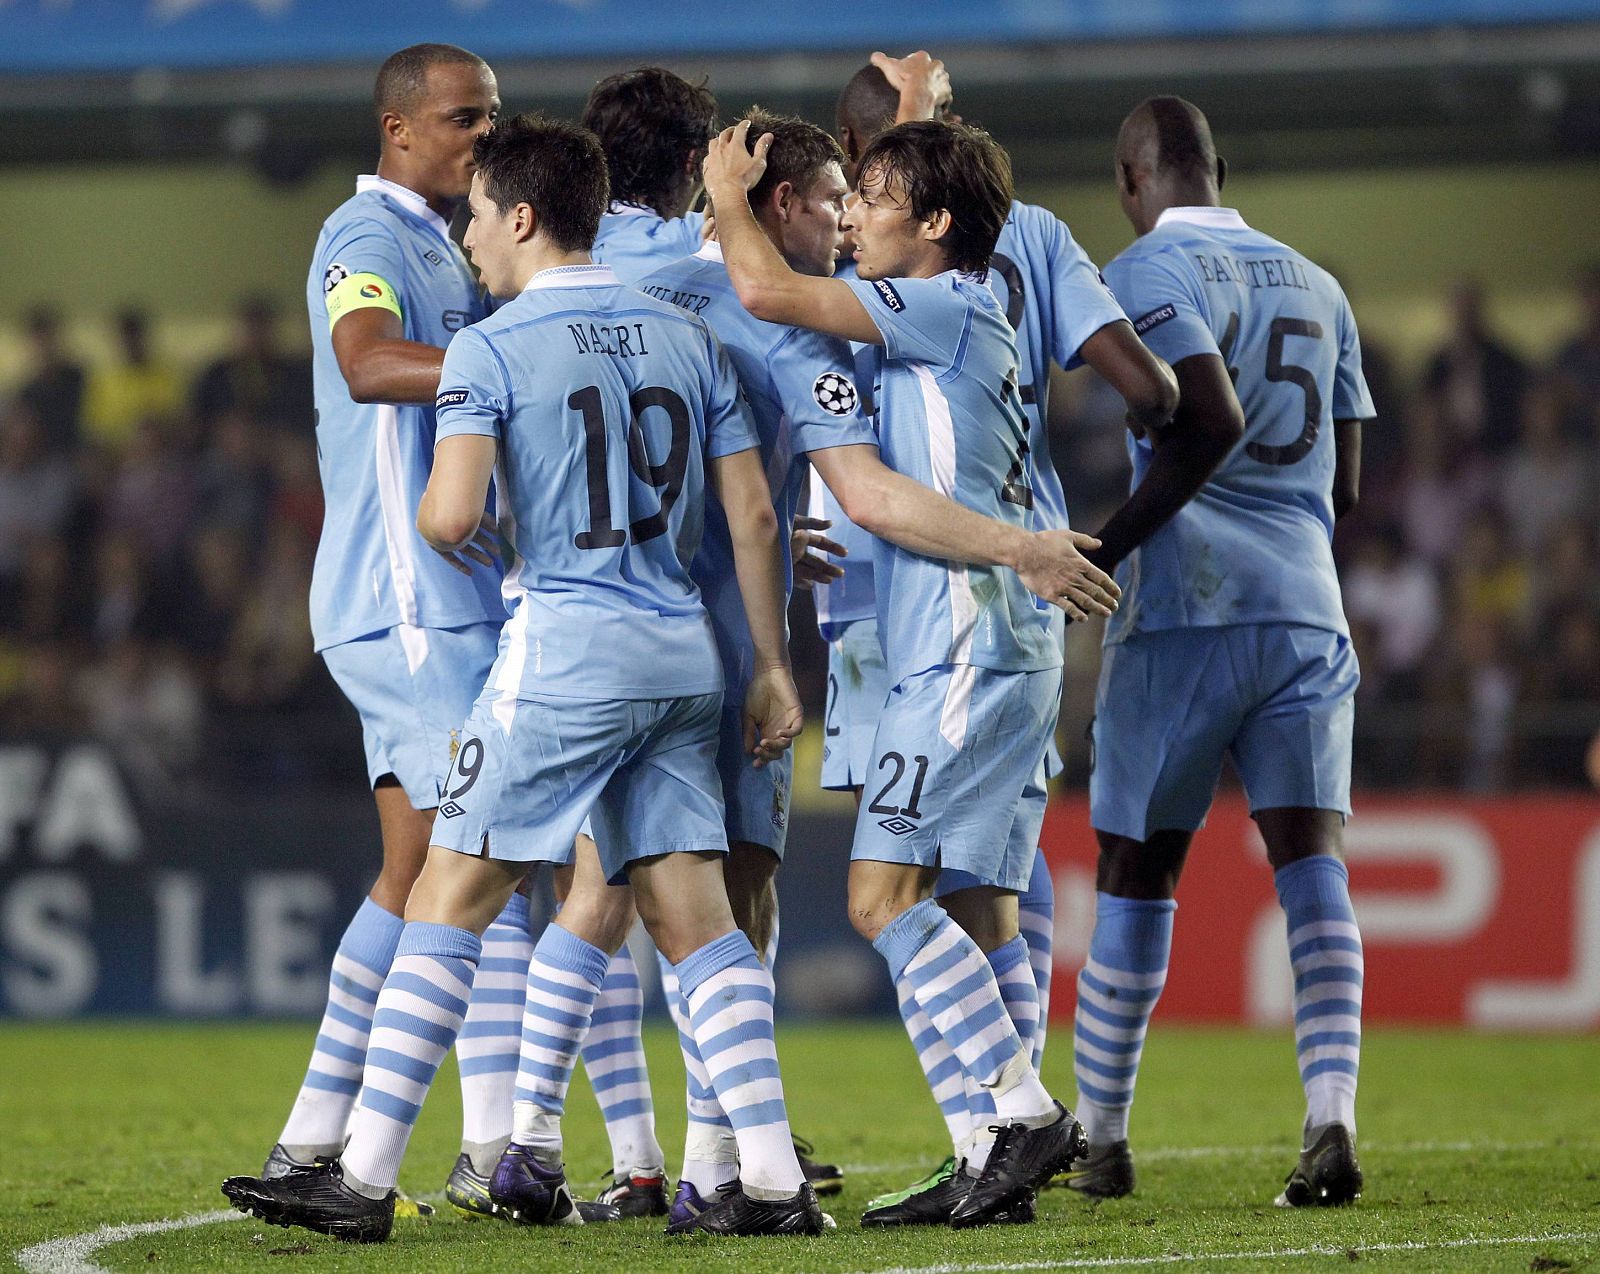 Manchester City players celebrate after Yaya Toure scored their first goal during their Champions League Group A soccer match against Villarreal at the Madrigal stadium in Villarreal